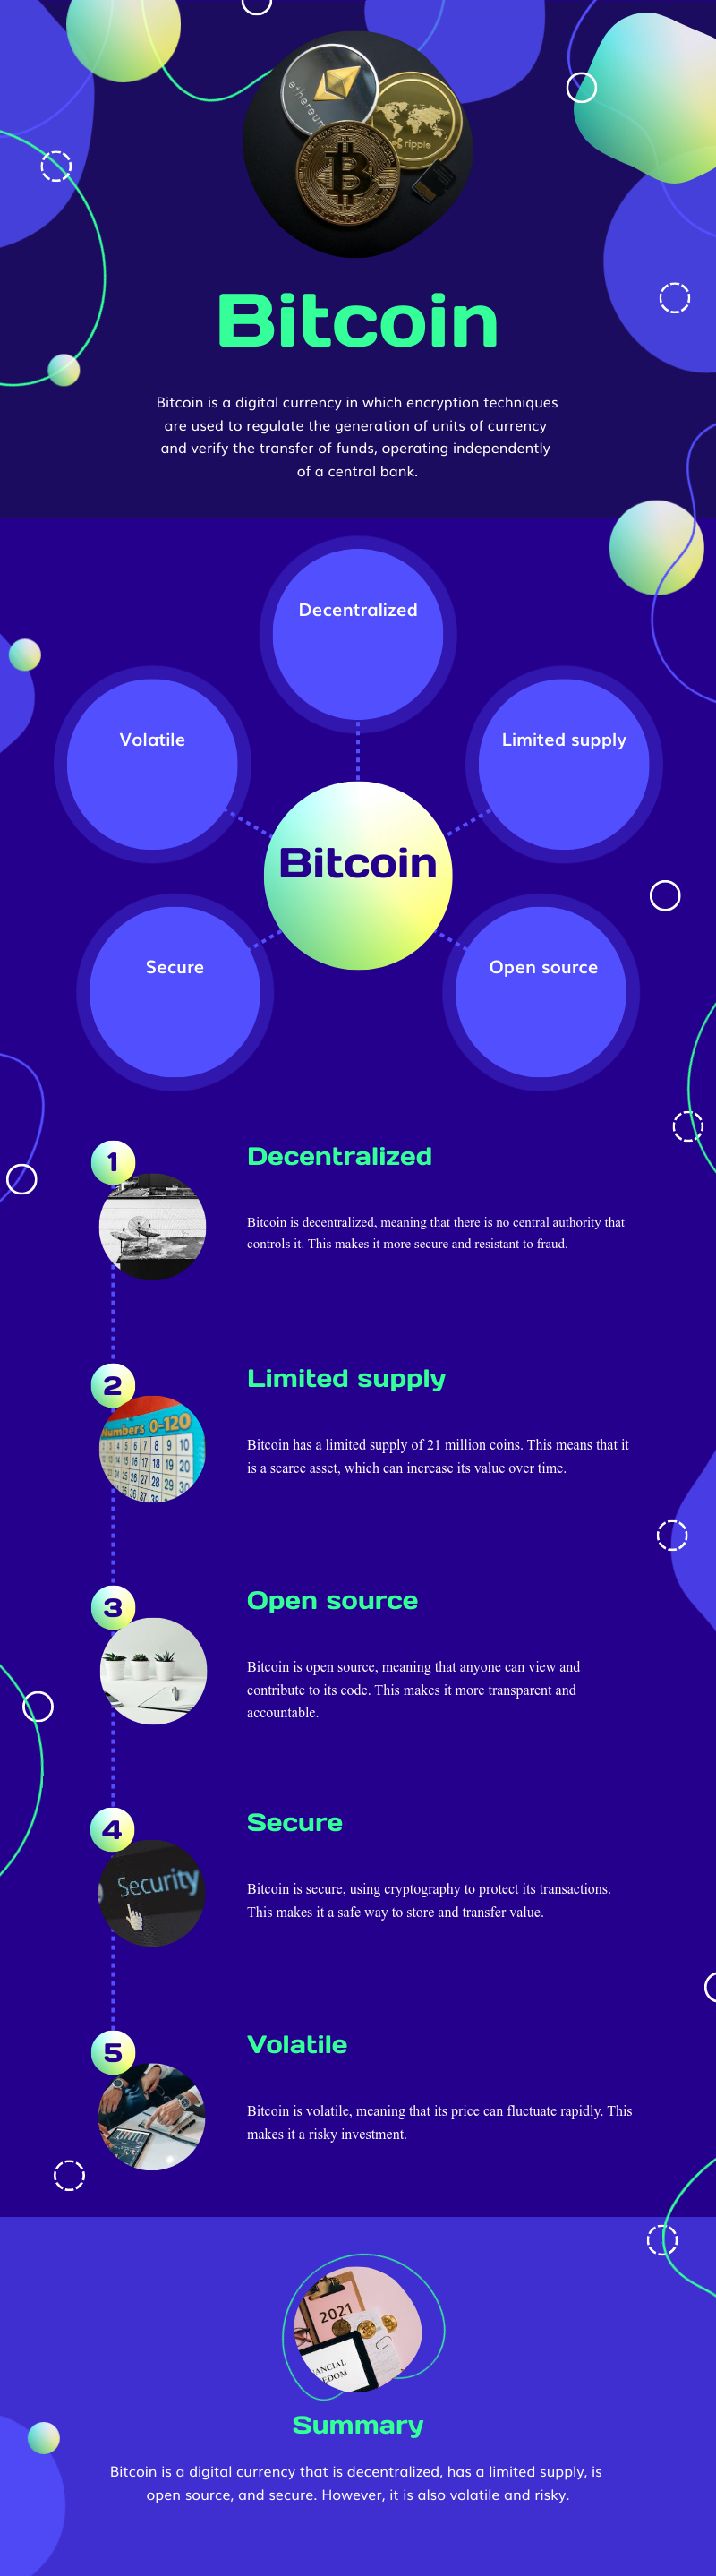 An infographic titled "Bitcoin" with key attributes like decentralized, limited supply, open source, secure, and volatile, explained with corresponding icons and short descriptions.